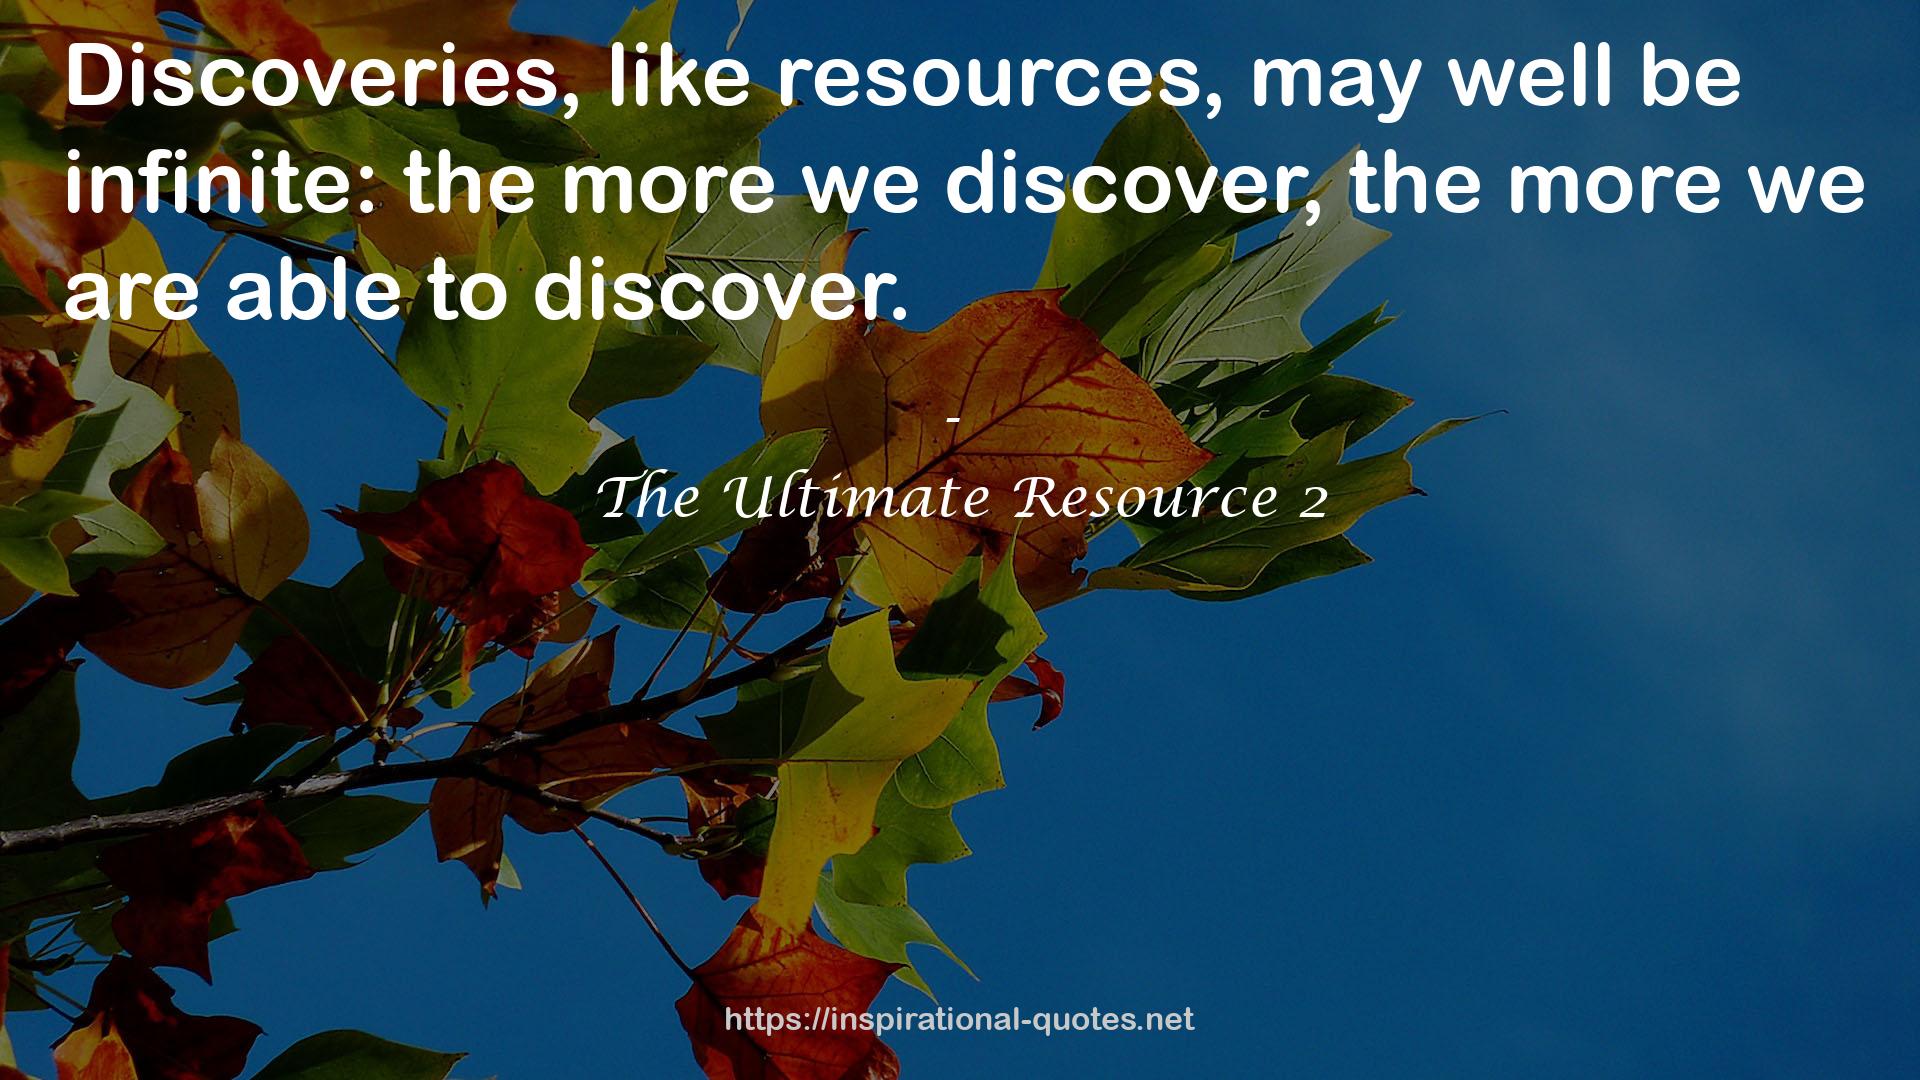 The Ultimate Resource 2 QUOTES